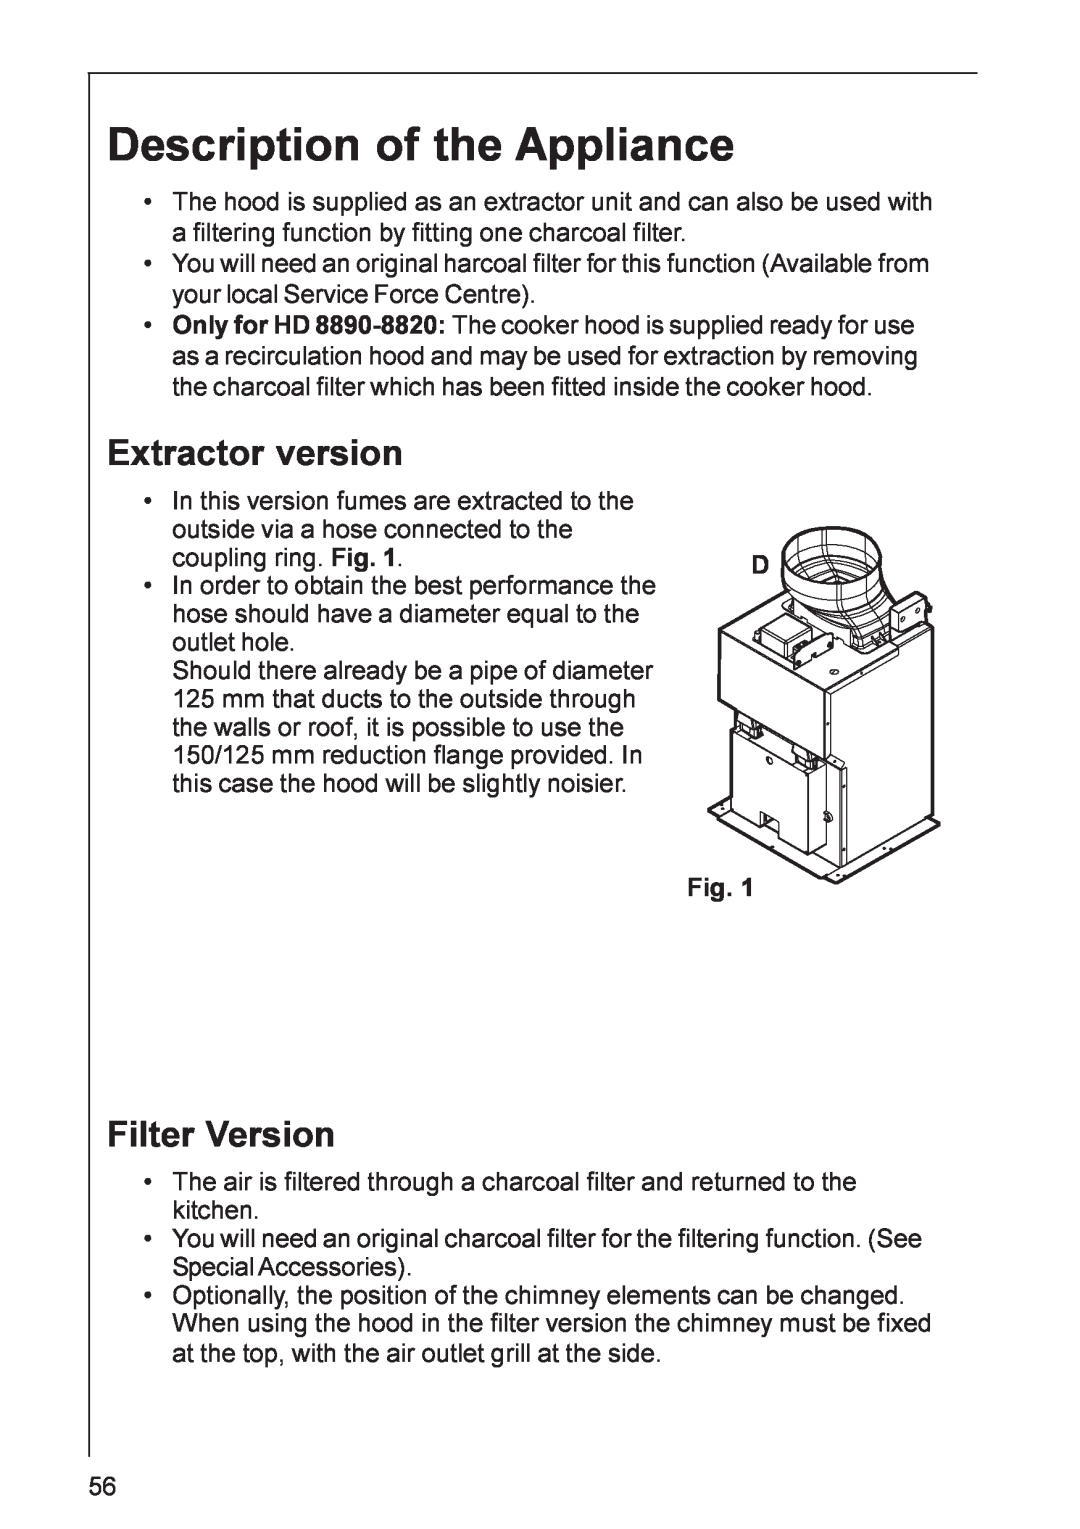 Electrolux HD 8820, HD 8890, DD 8820 Description of the Appliance, Extractor version, Filter Version 